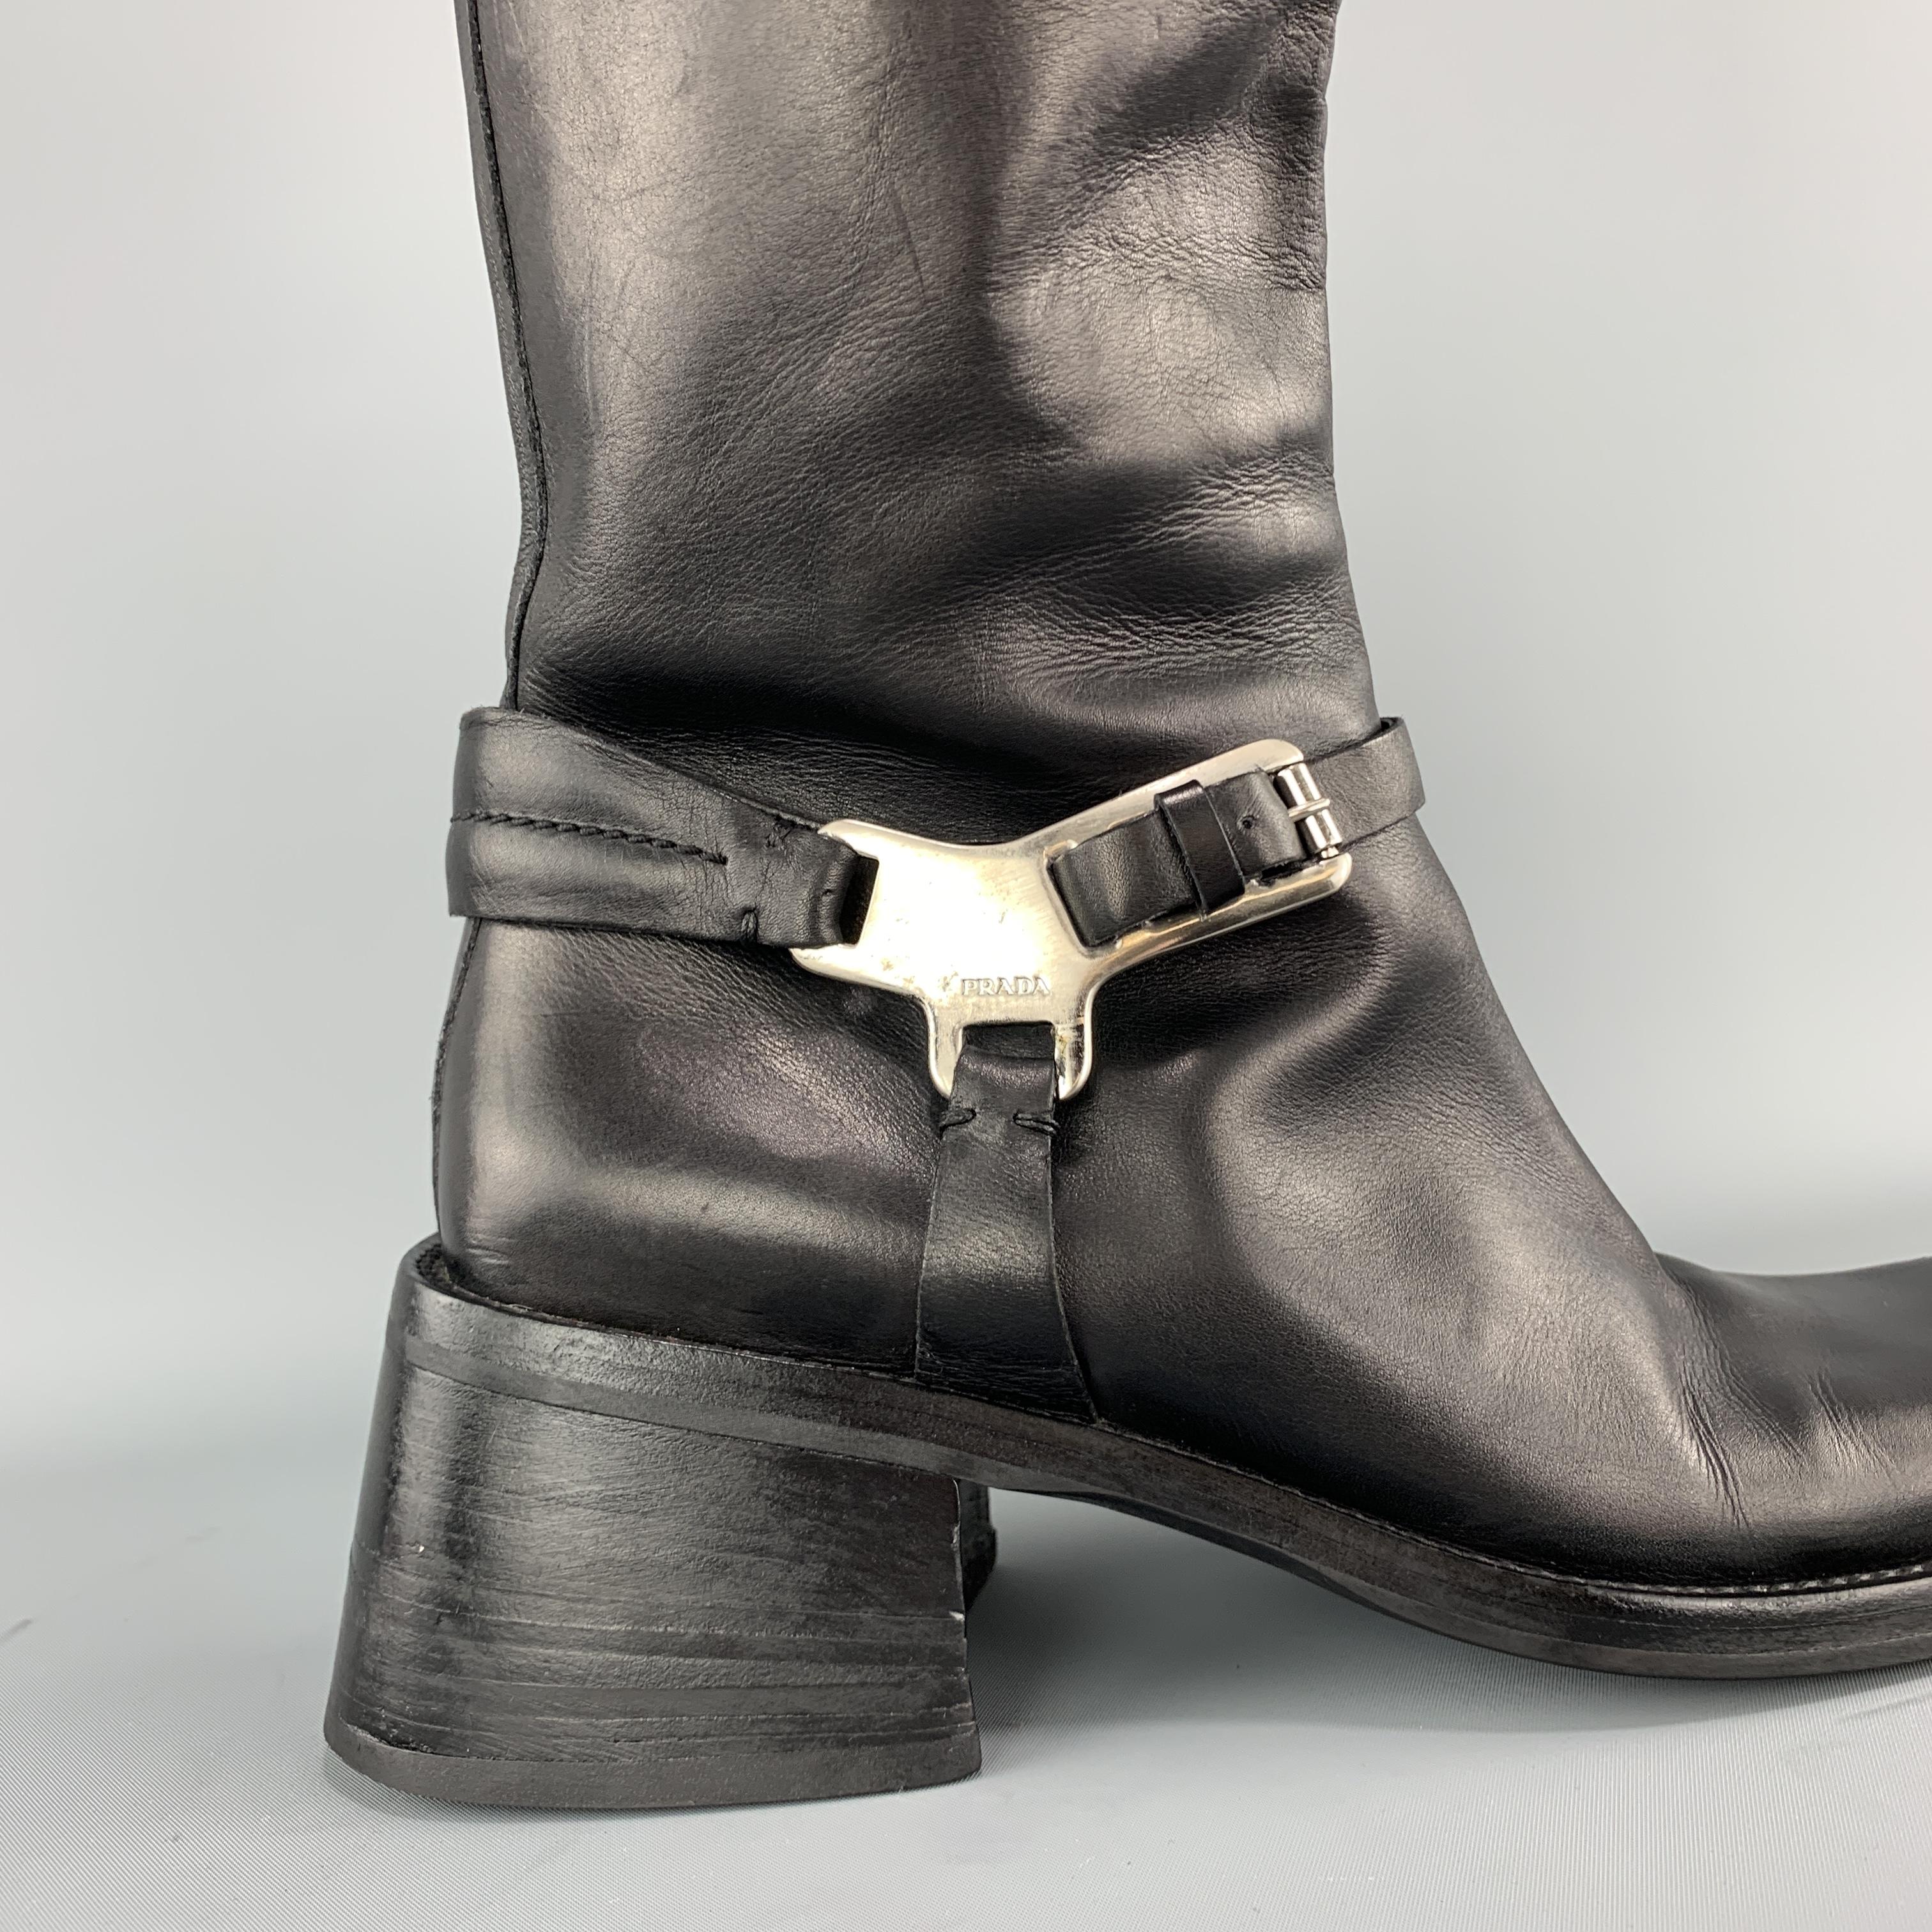 Vintage 1990's PRADA knee high boots come in smooth black leather with a stacked chunky heel and silver tone metal detailed harness. Made in Italy.

Very Good Pre-Owned Condition.
Marked: IT 40

Width: 4 in.
Heel: 2.5 in.
Length: 15.5 in.
Ankle: 12